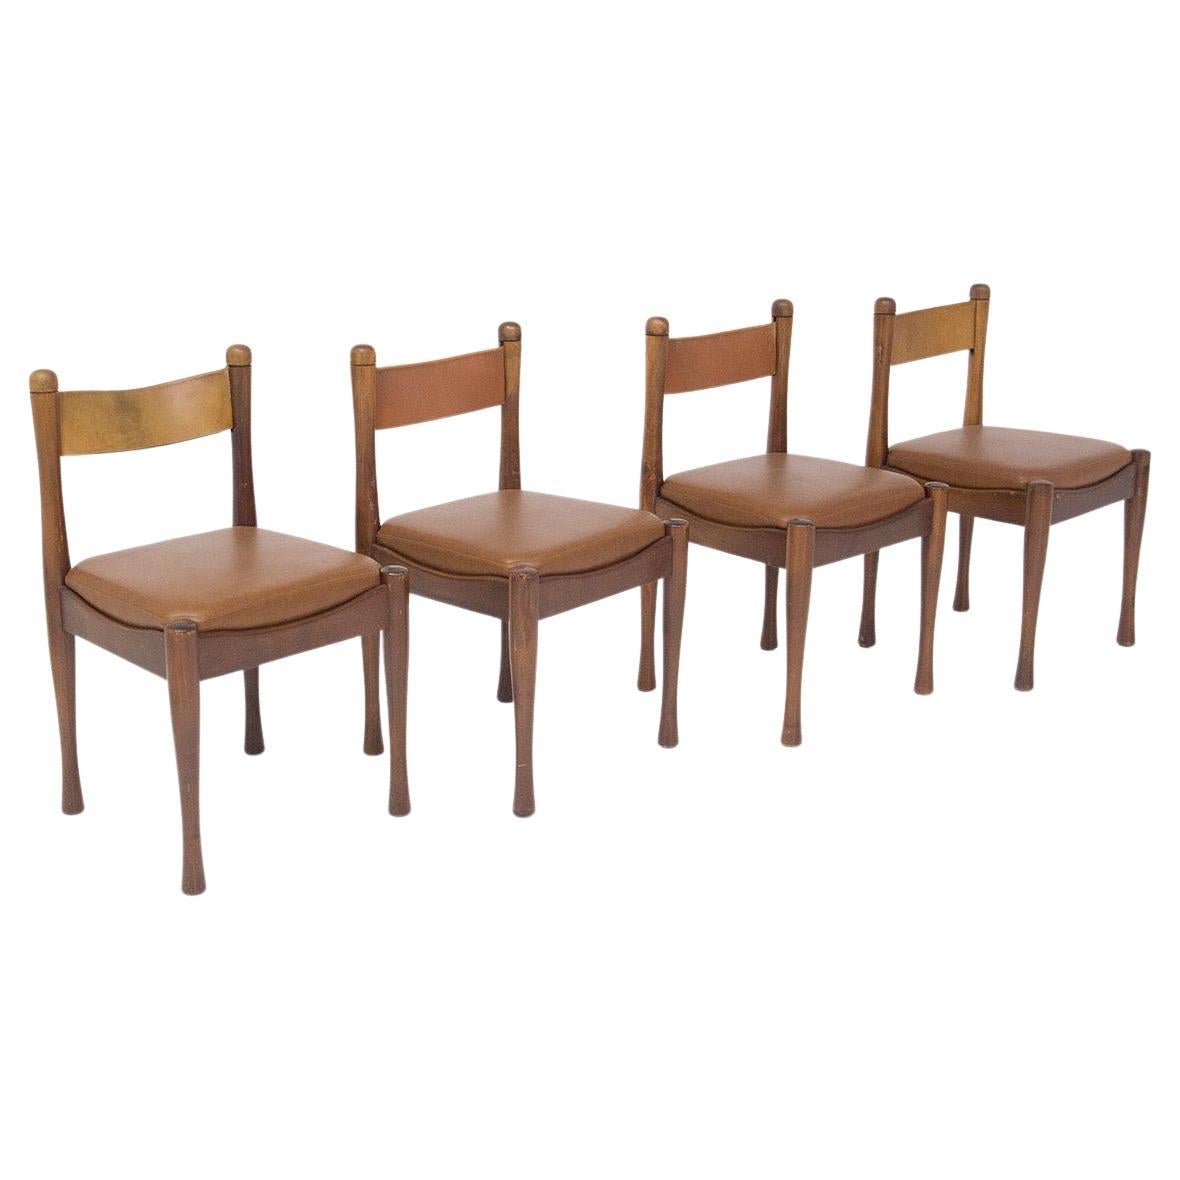 Four Vintage Chairs by Silvio Coppola for Bernini, Label